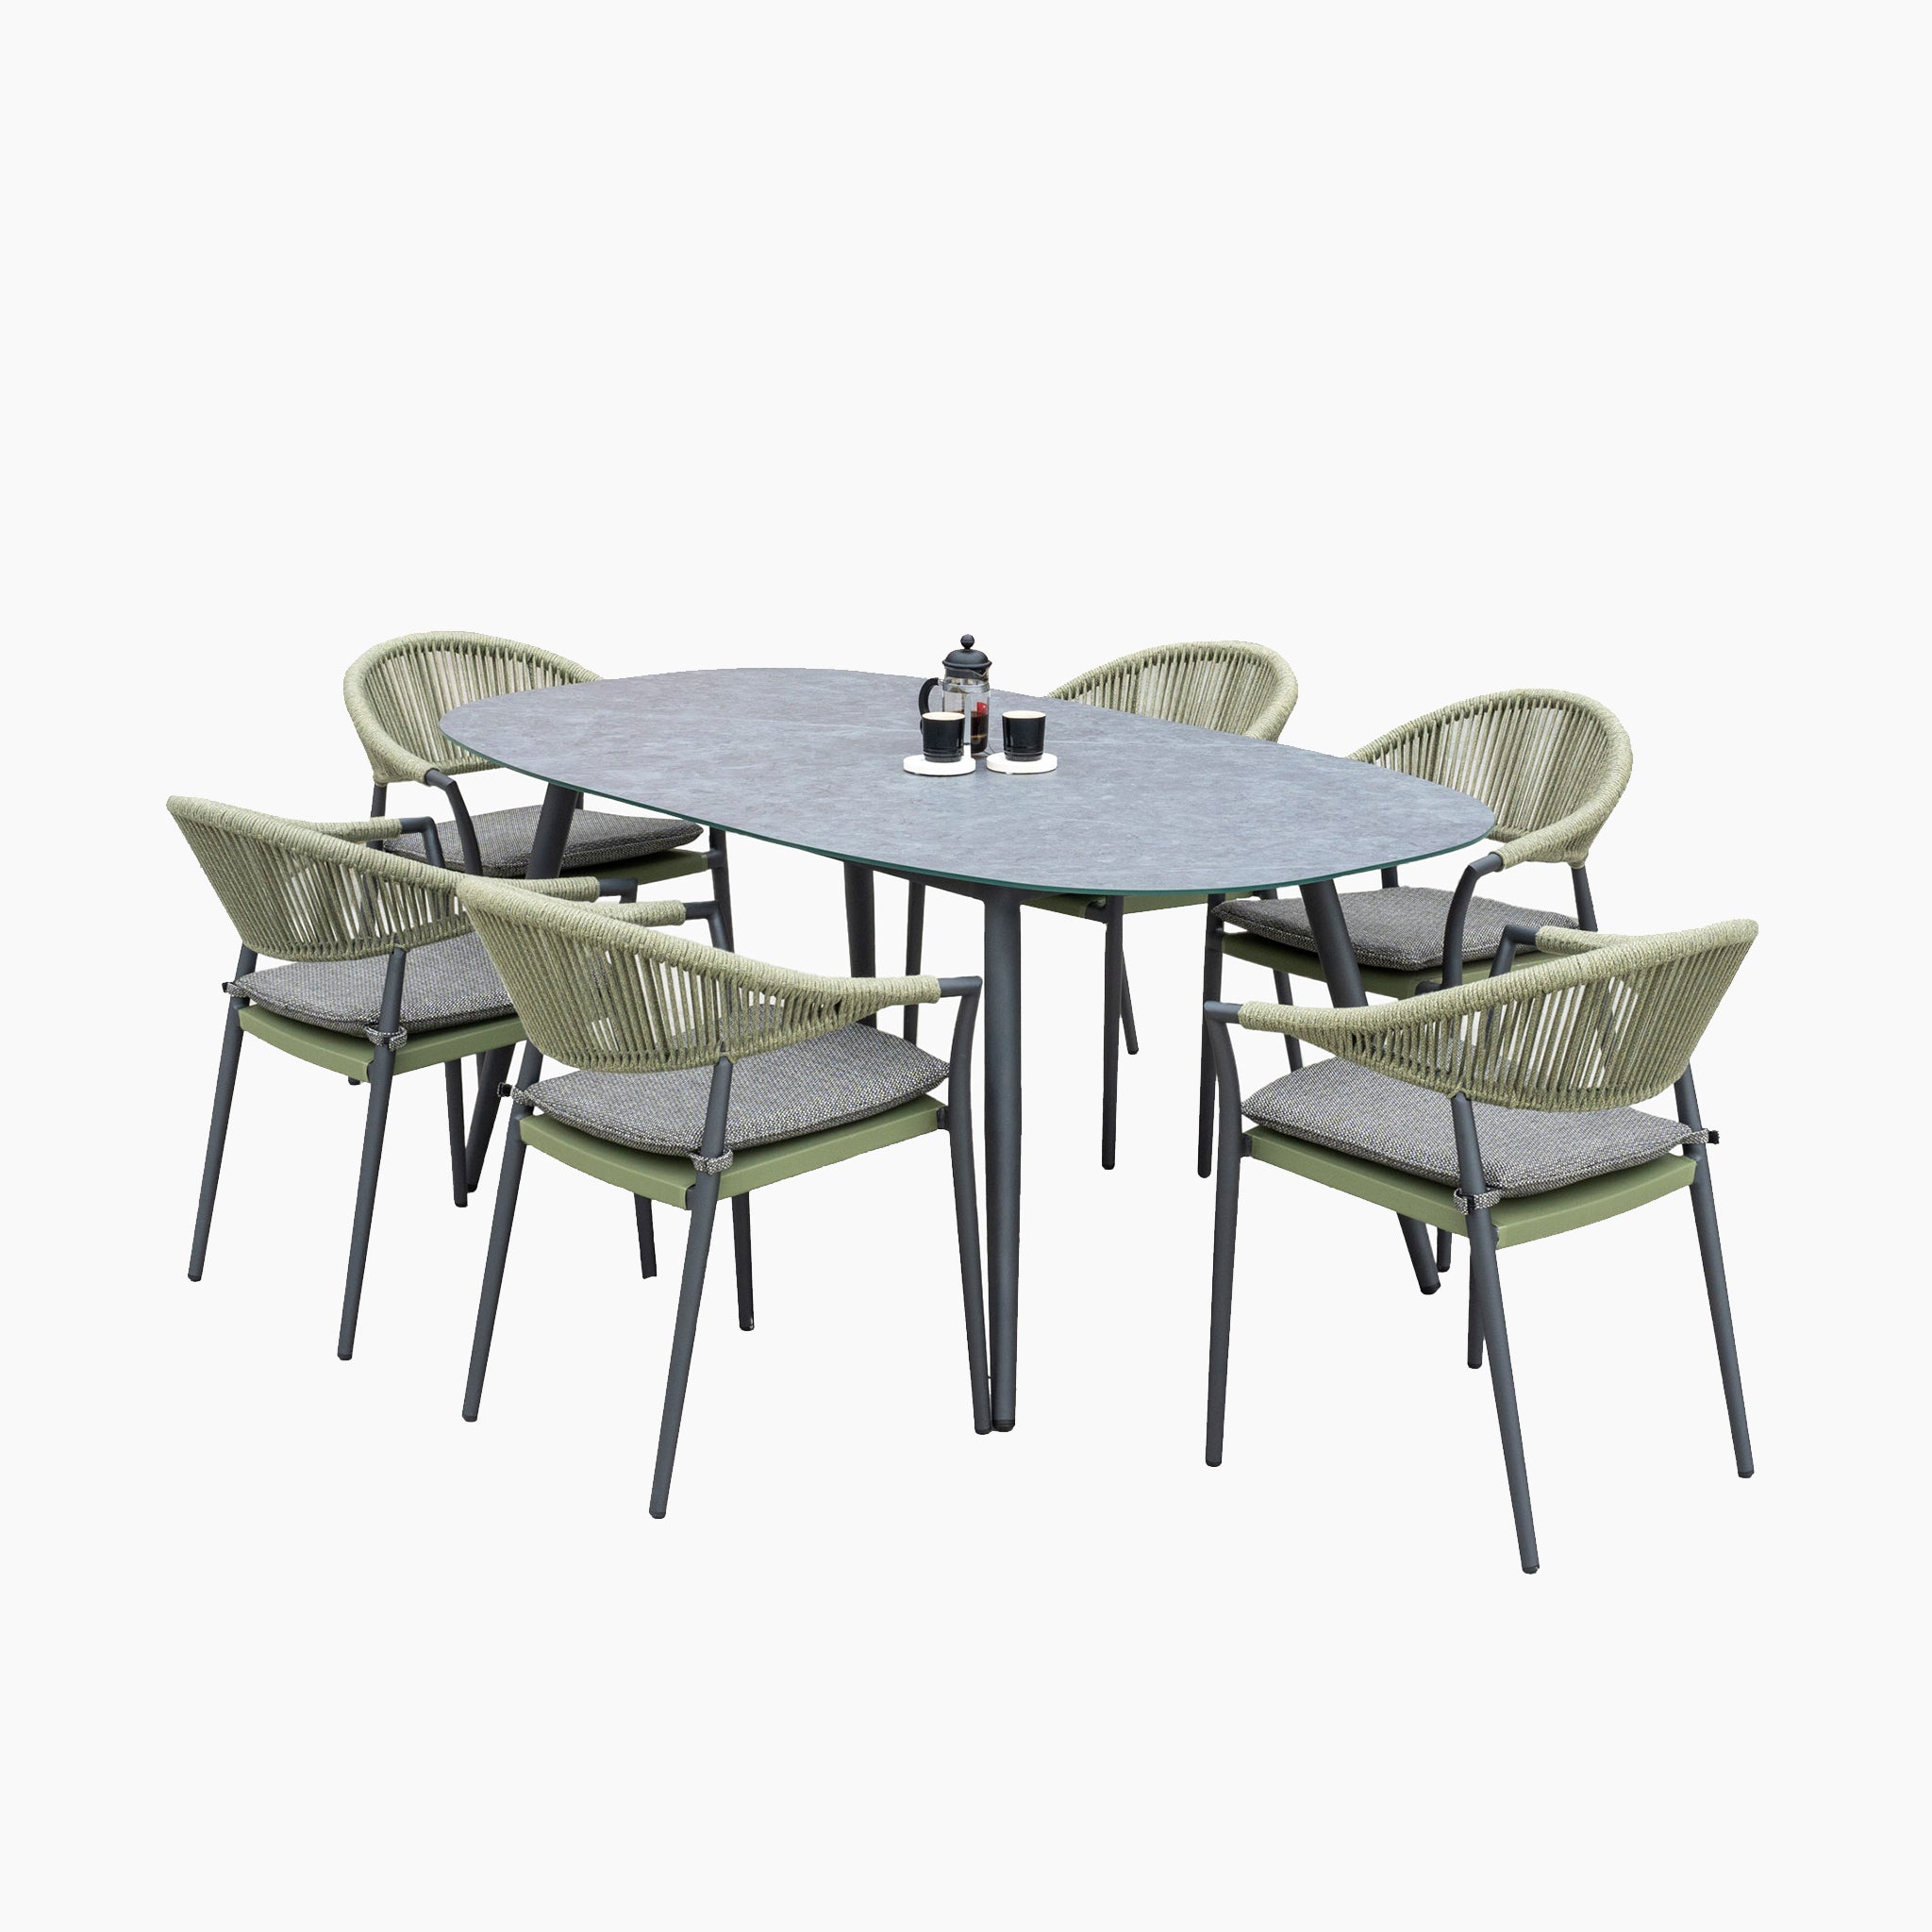 Cloverly 6 Seat Rope Oval Dining Set with Ceramic Table in Olive Green